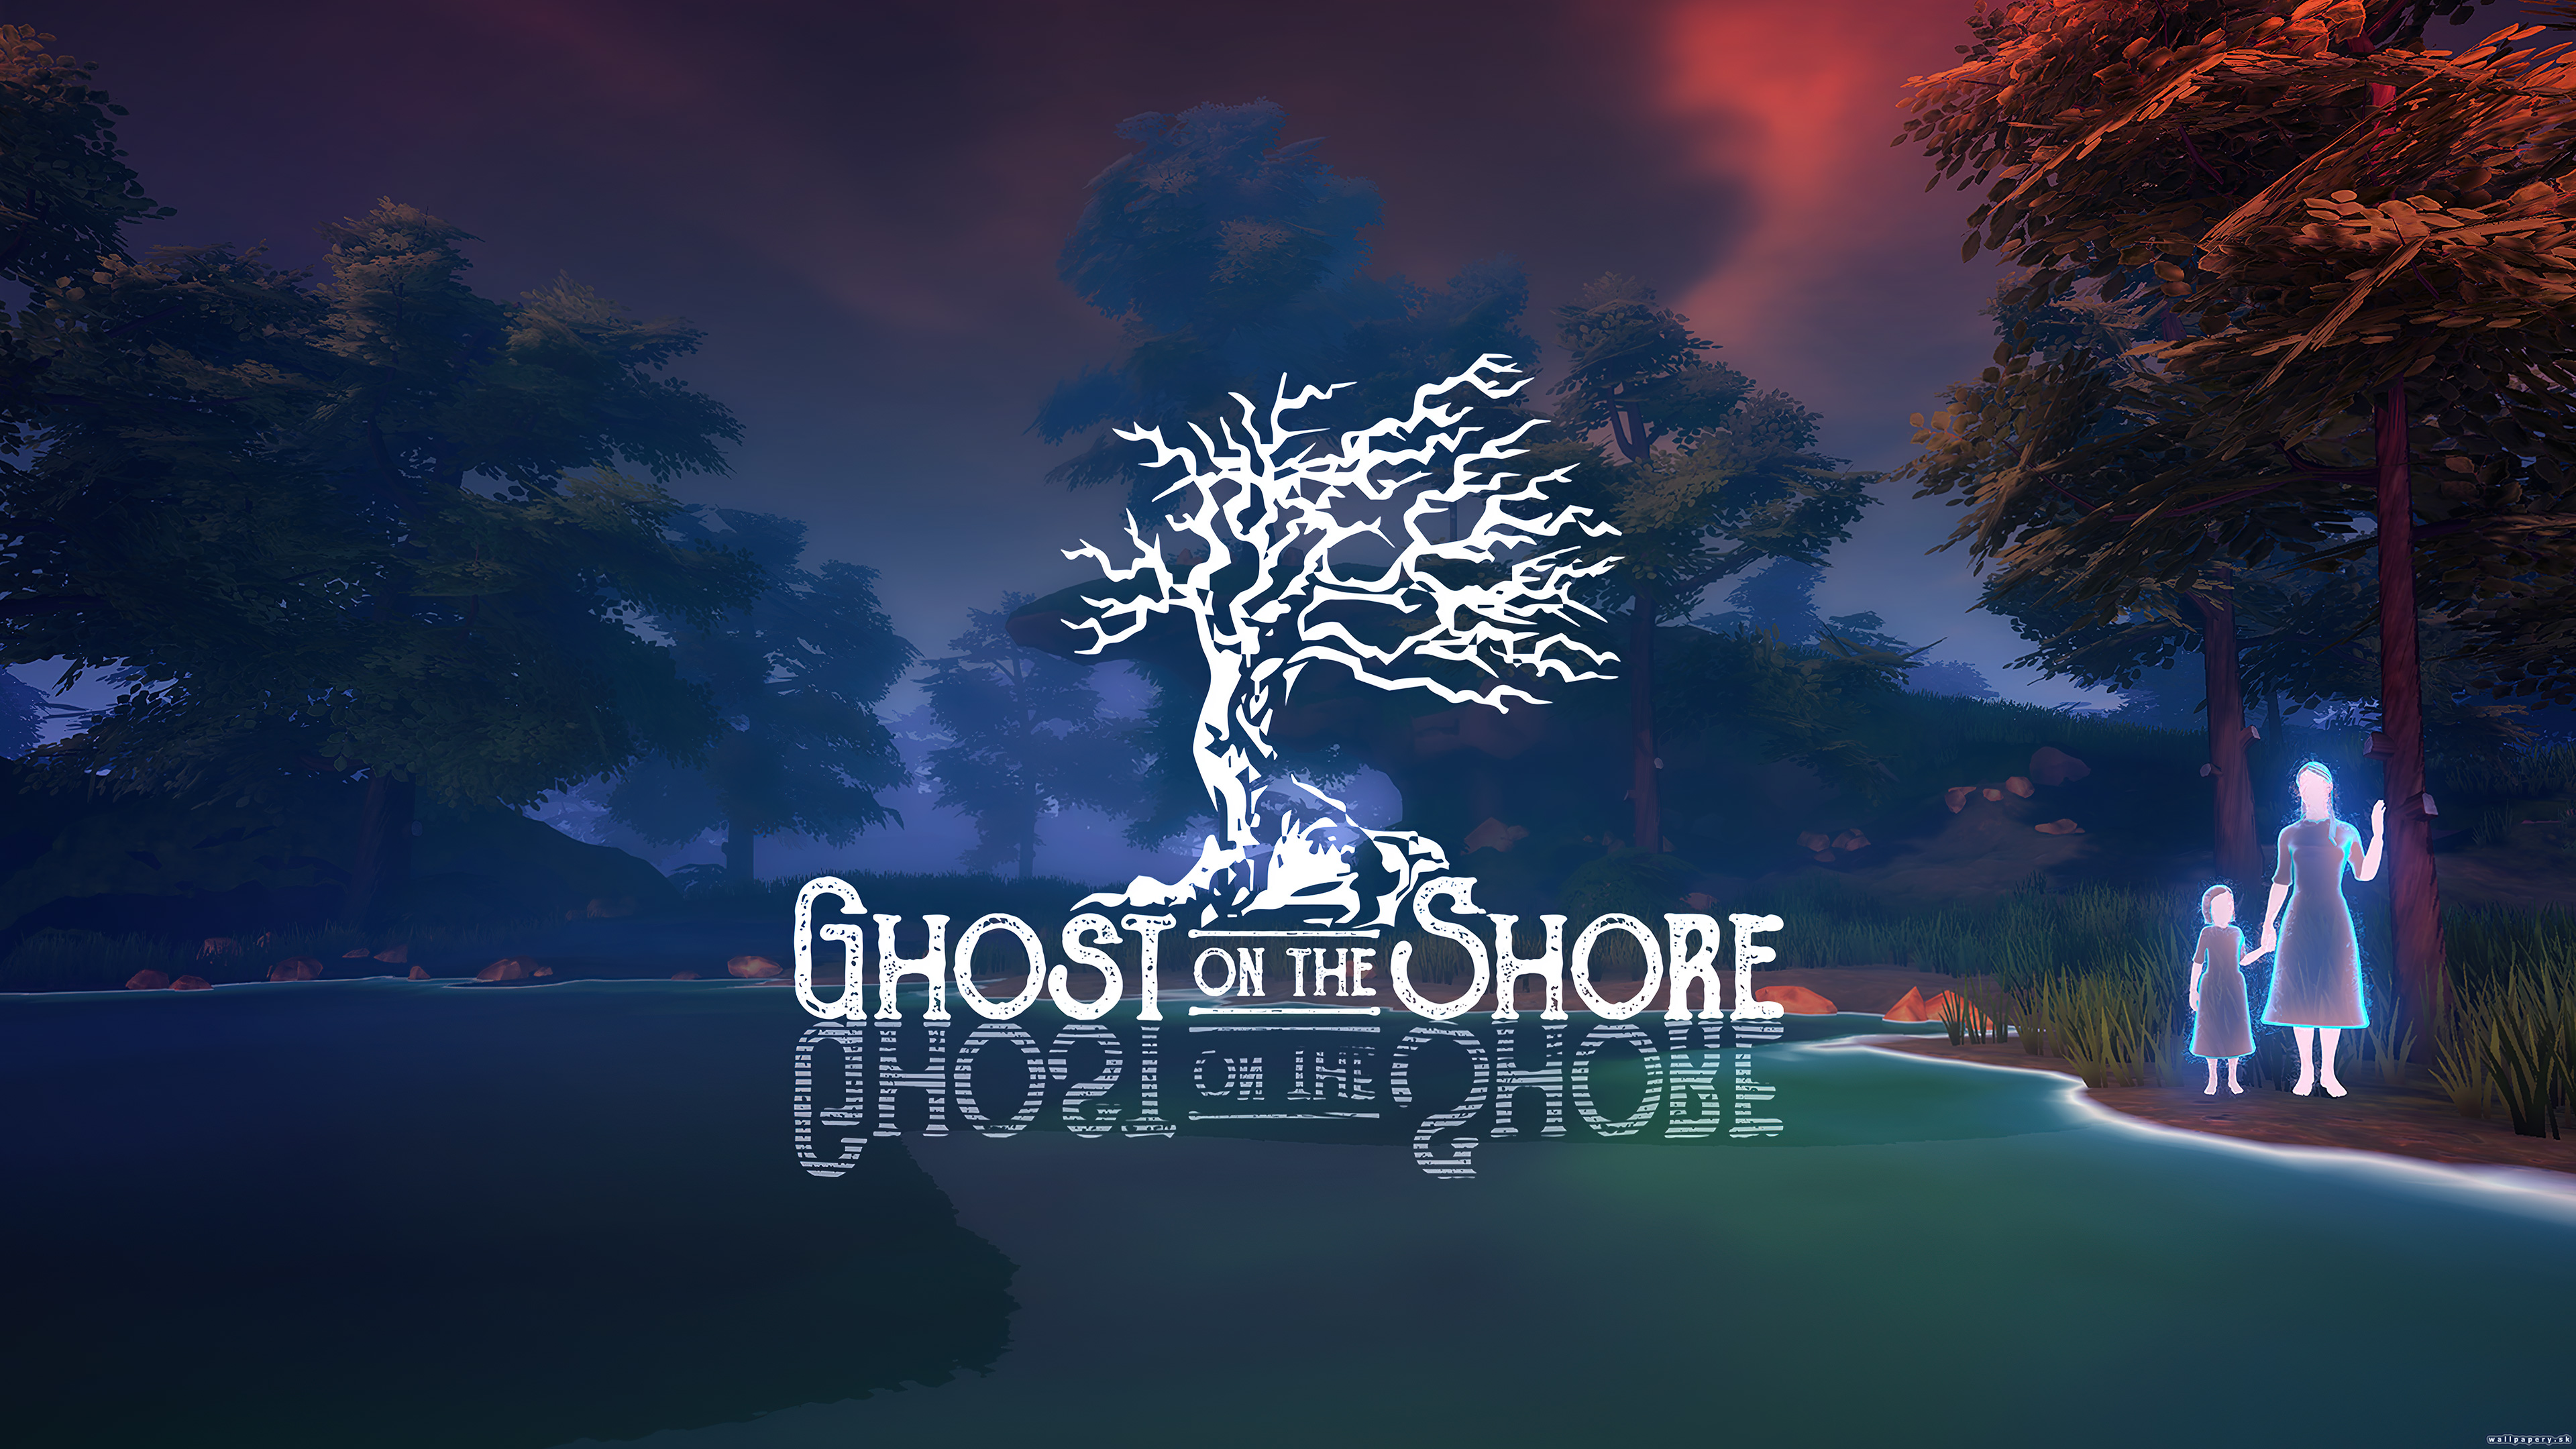 Ghost on the Shore - wallpaper 1